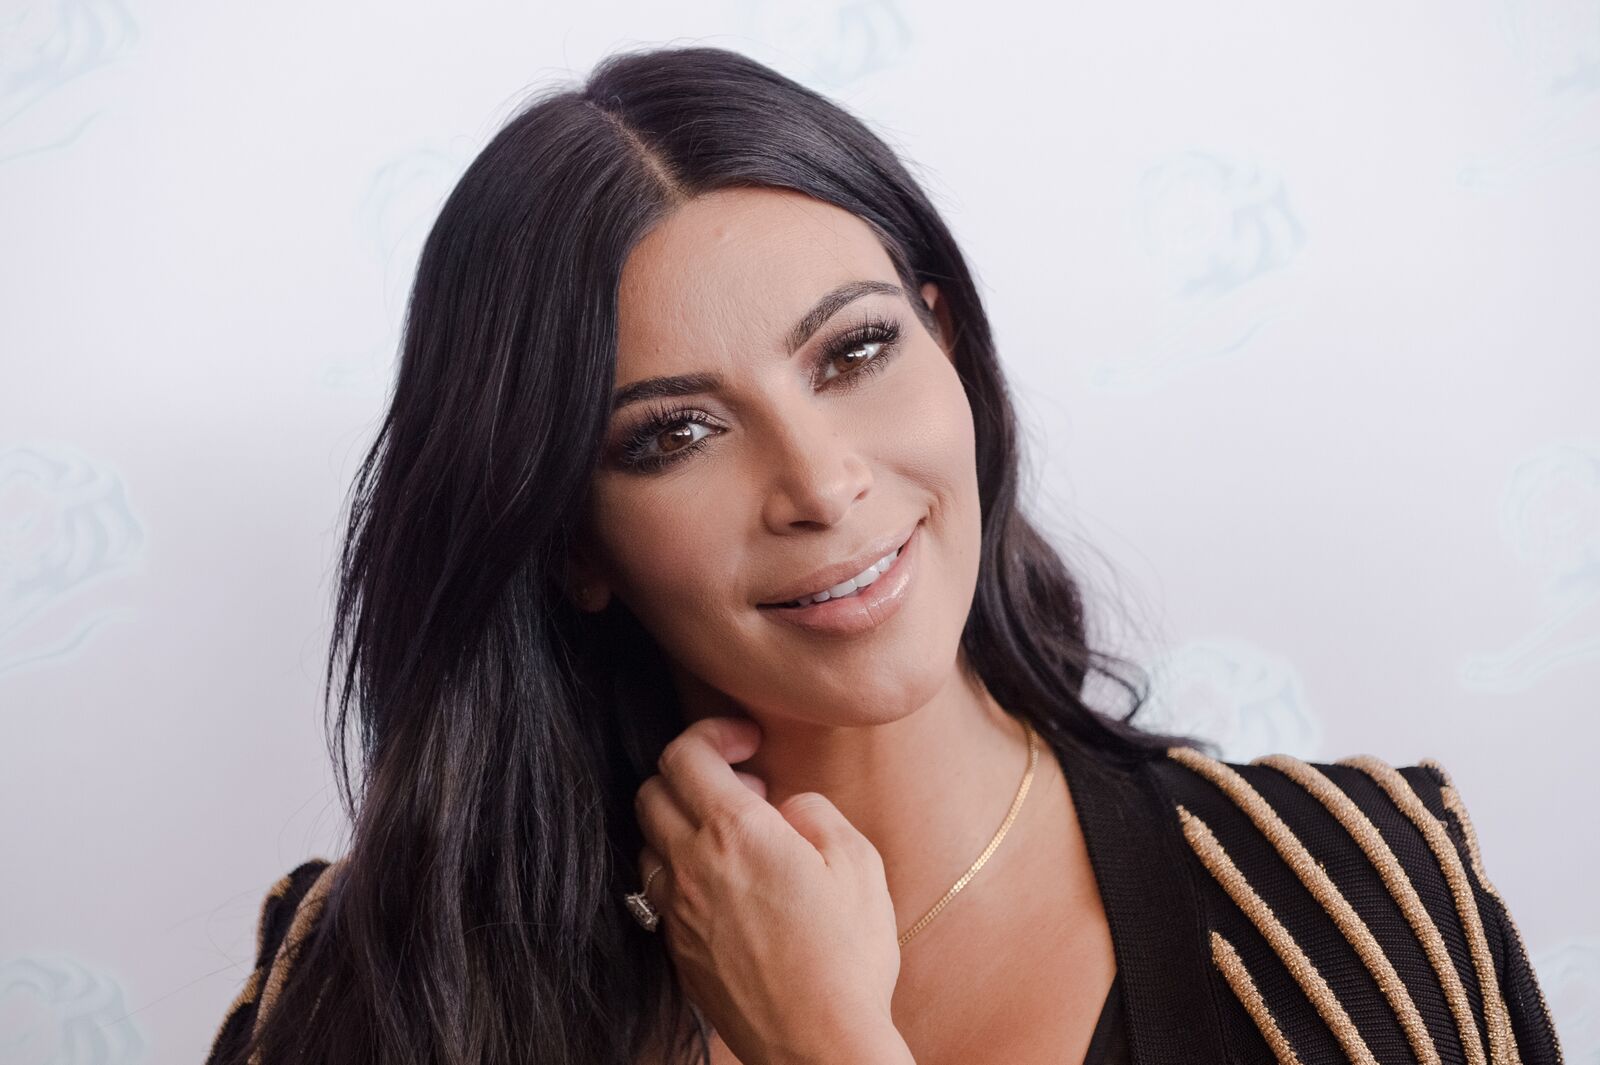  Kim Kardashian attends a 'Sudler' talk during Cannes Lions International Festival of Creativity on June 24, 2015 in Cannes, France | Photo: Getty Images